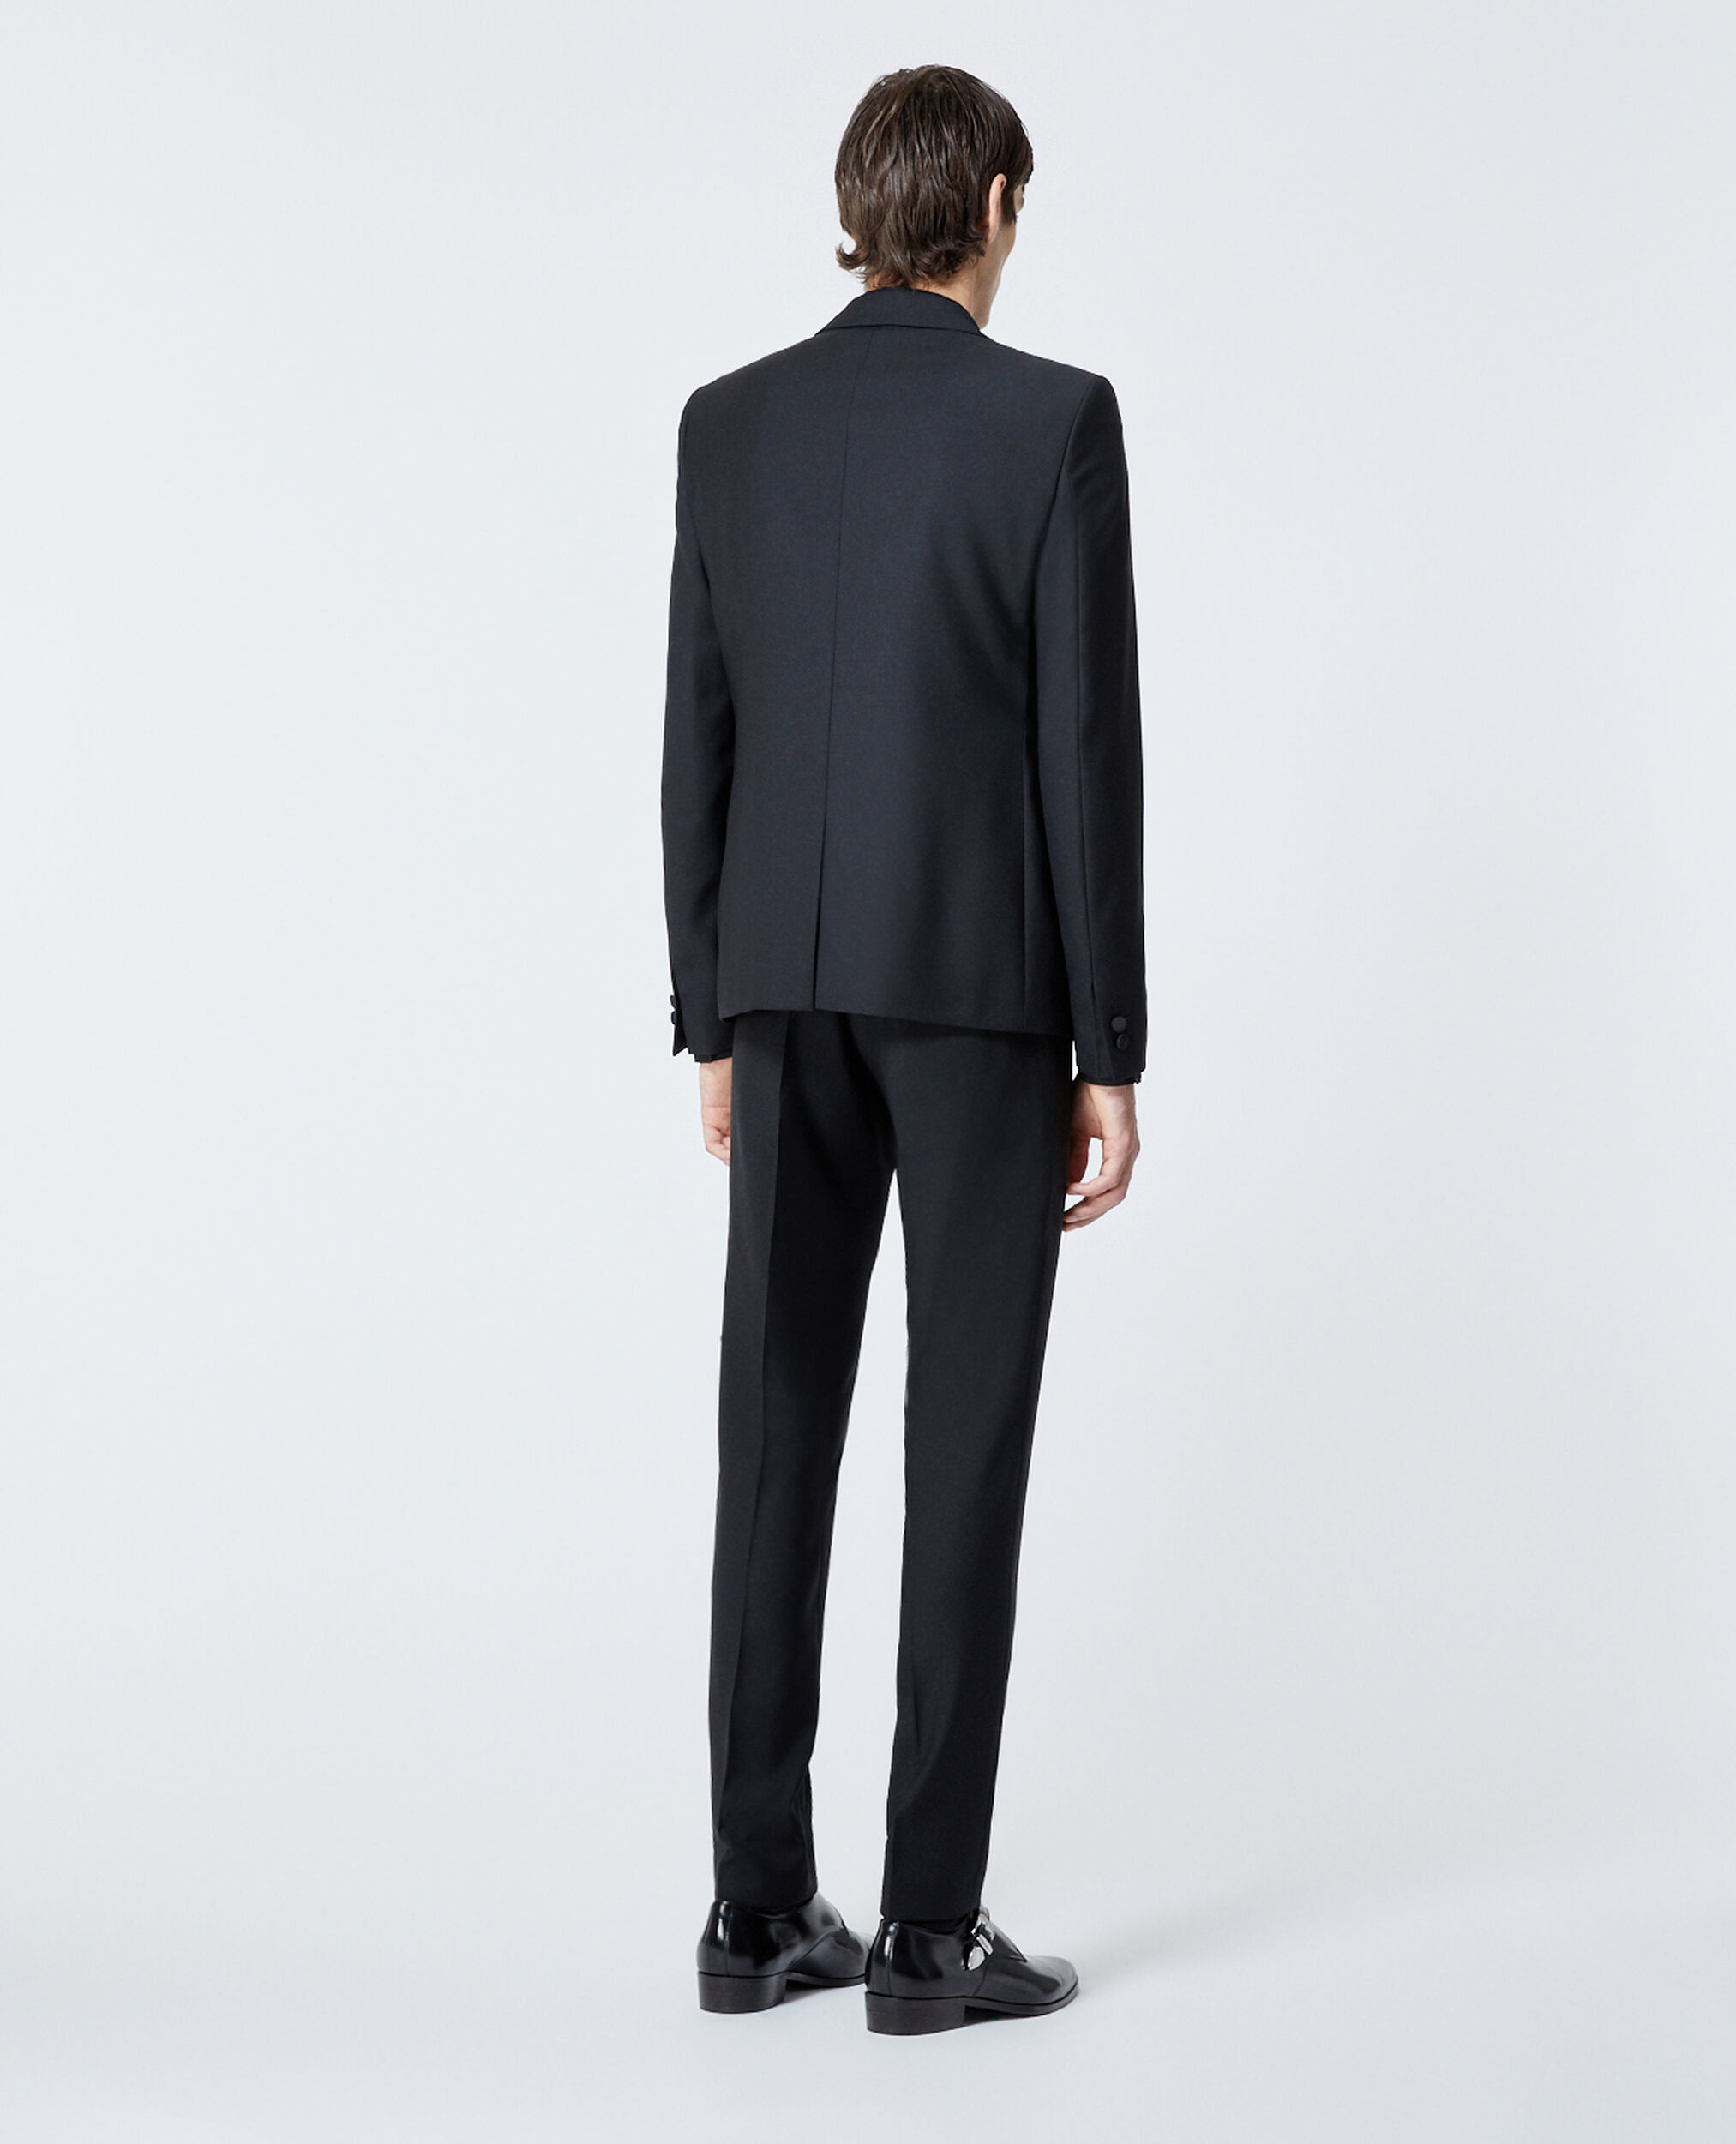 Fitted black tuxedo jacket in wool, BLACK, hi-res image number null